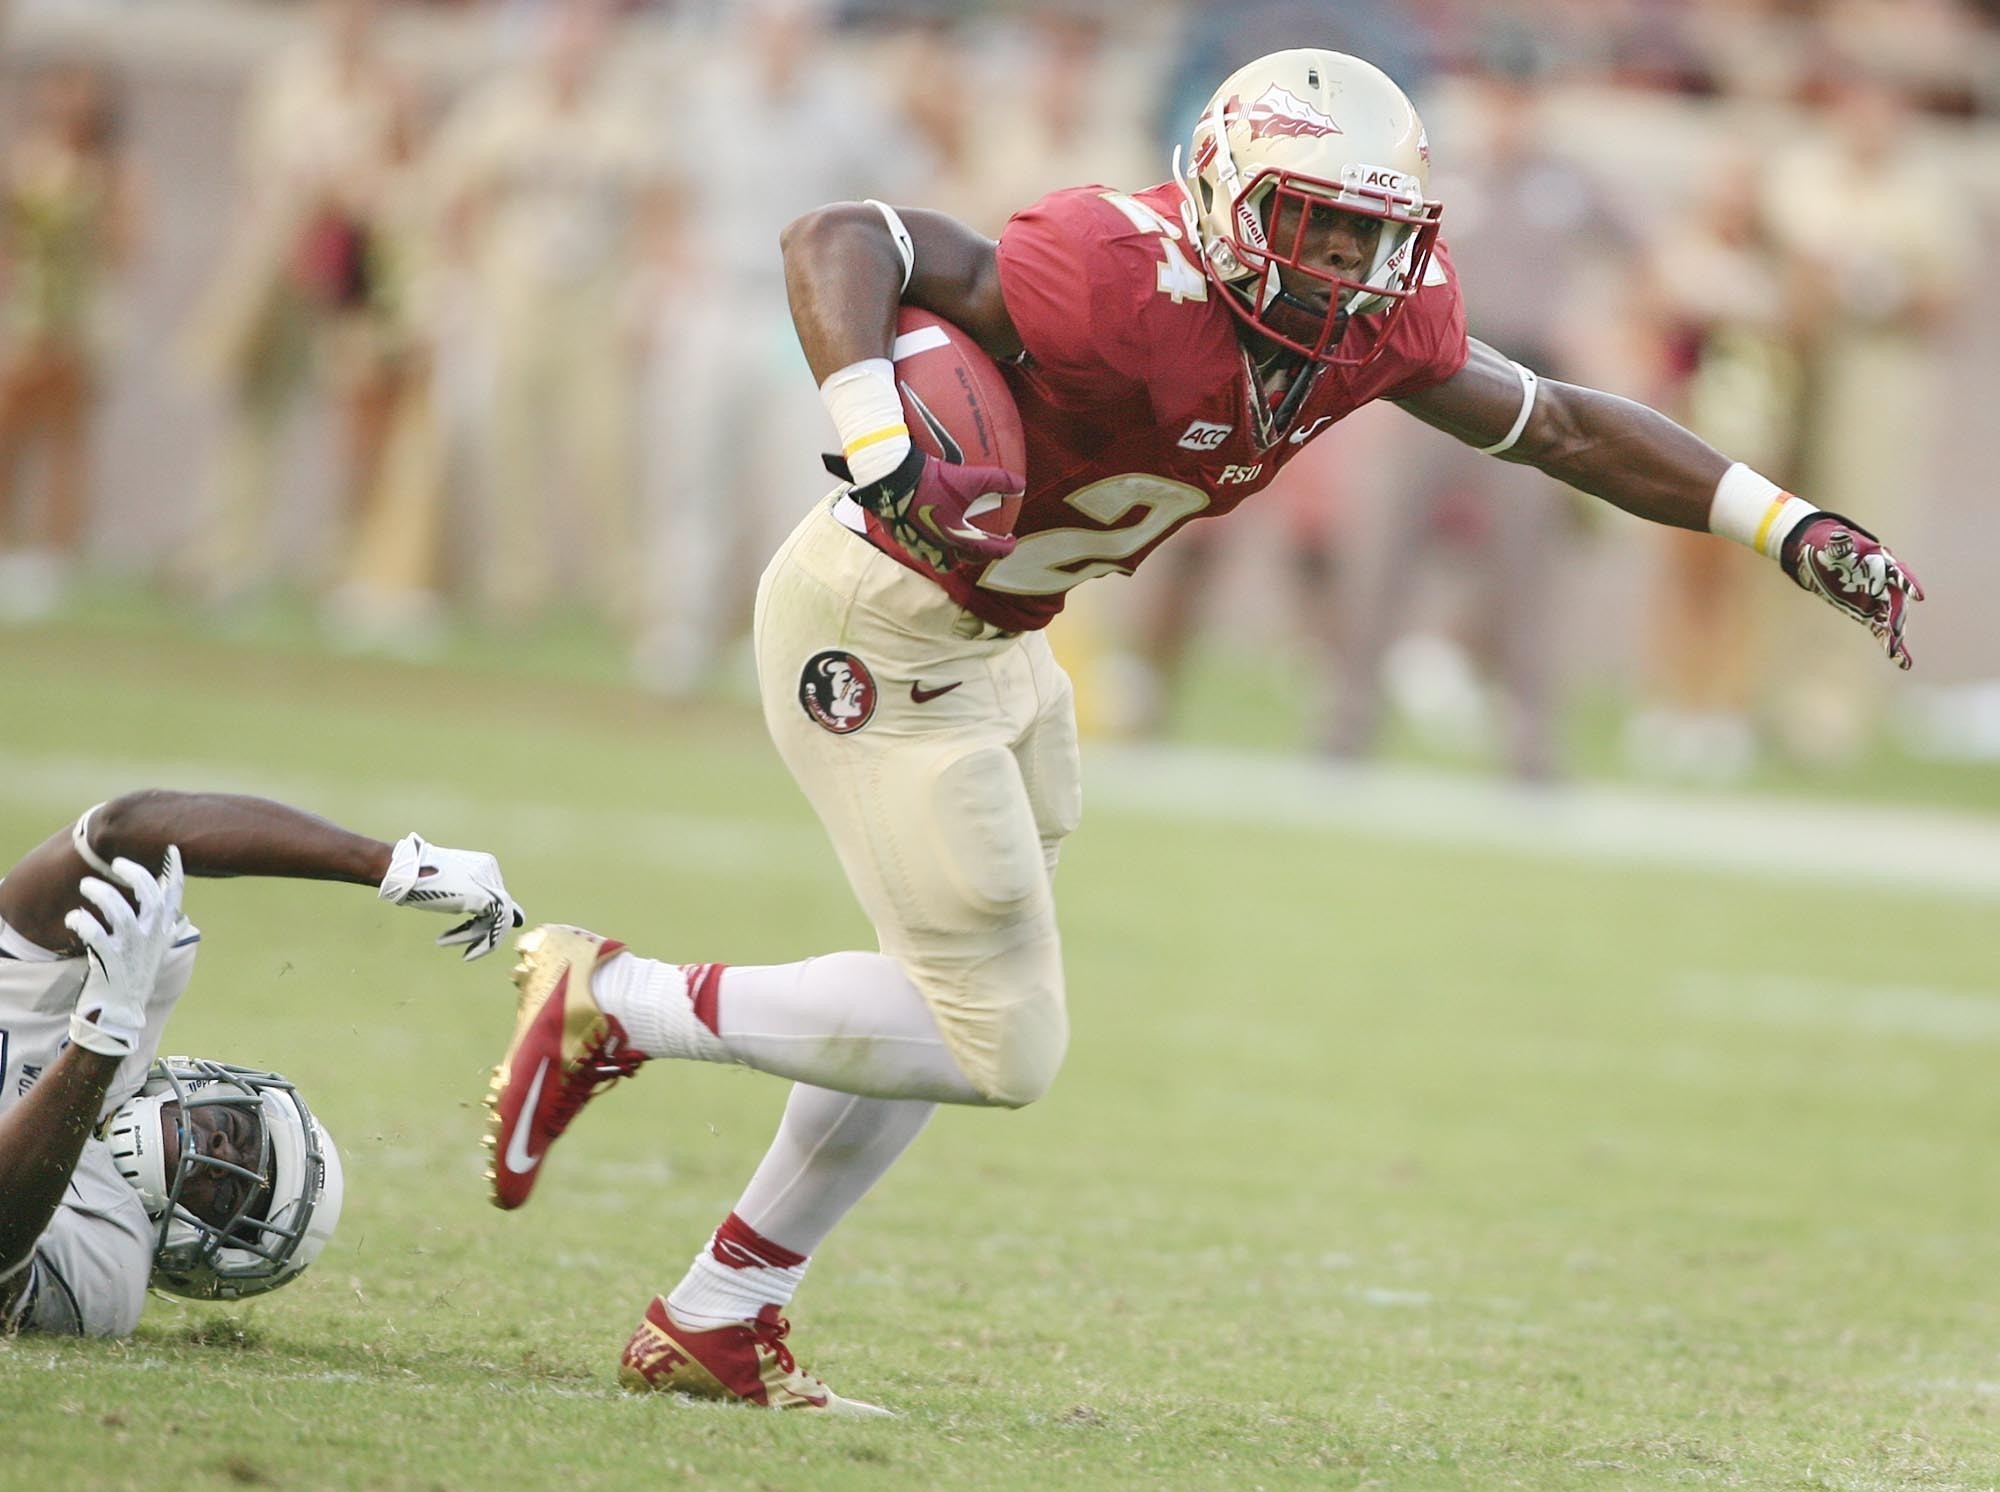 FSU spring football preview Five breakout candidates to watch